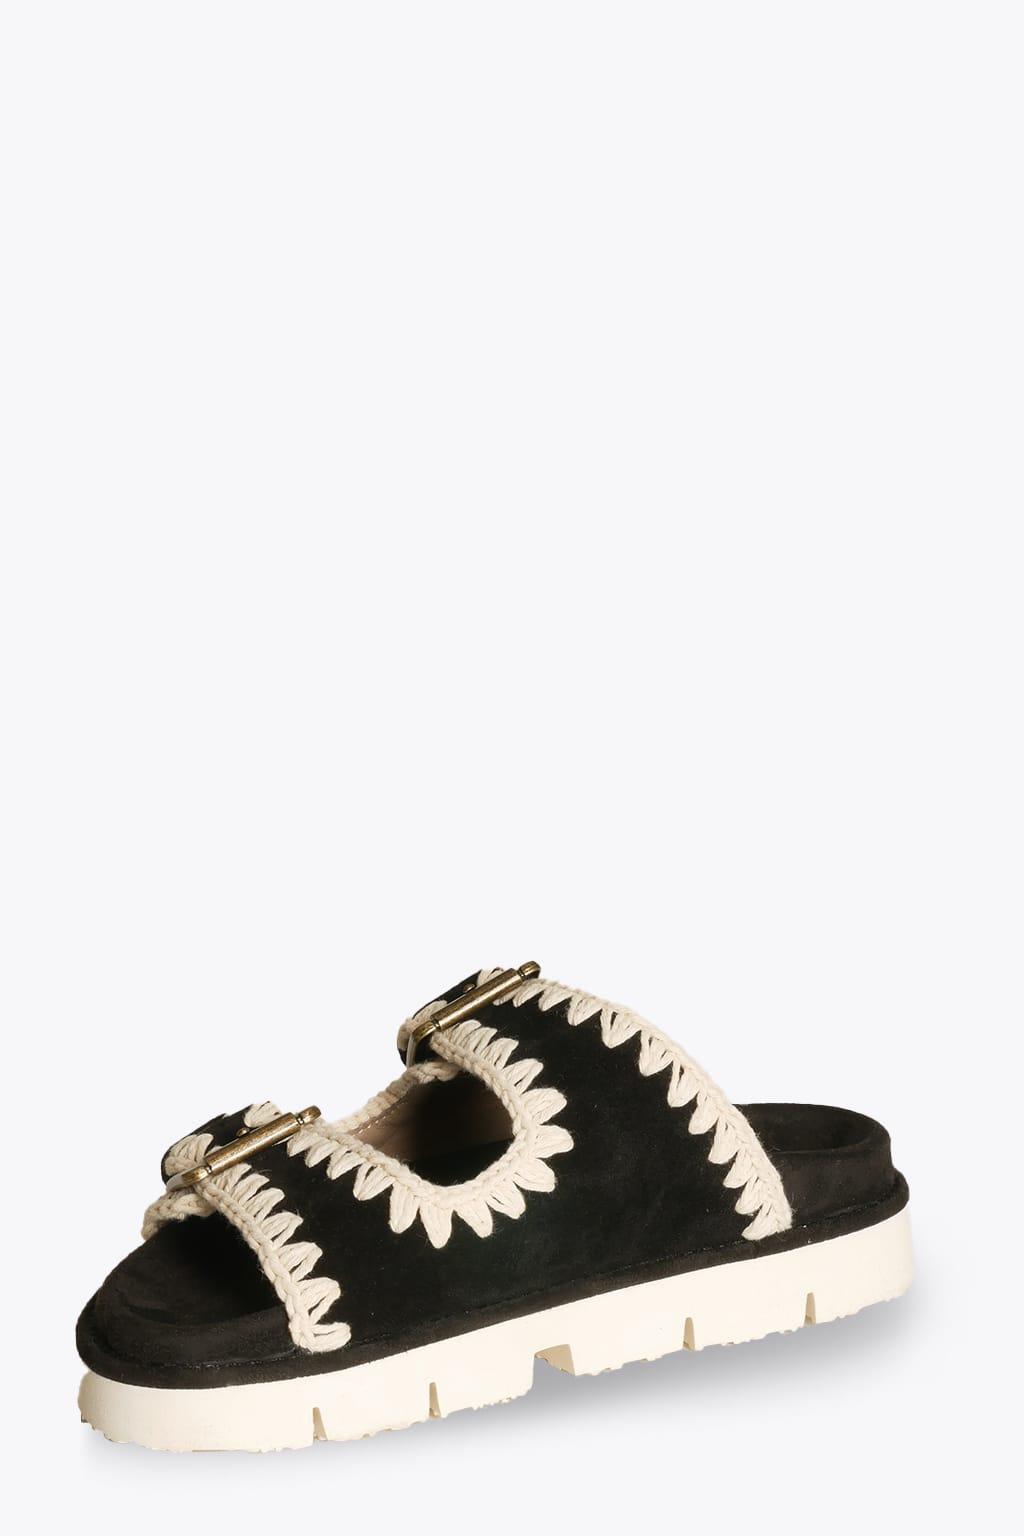 linned spise ubehag Mou New Bio With Buckles Black Suede Sandal With Embroidery - New Bio With  Buckles | Lyst